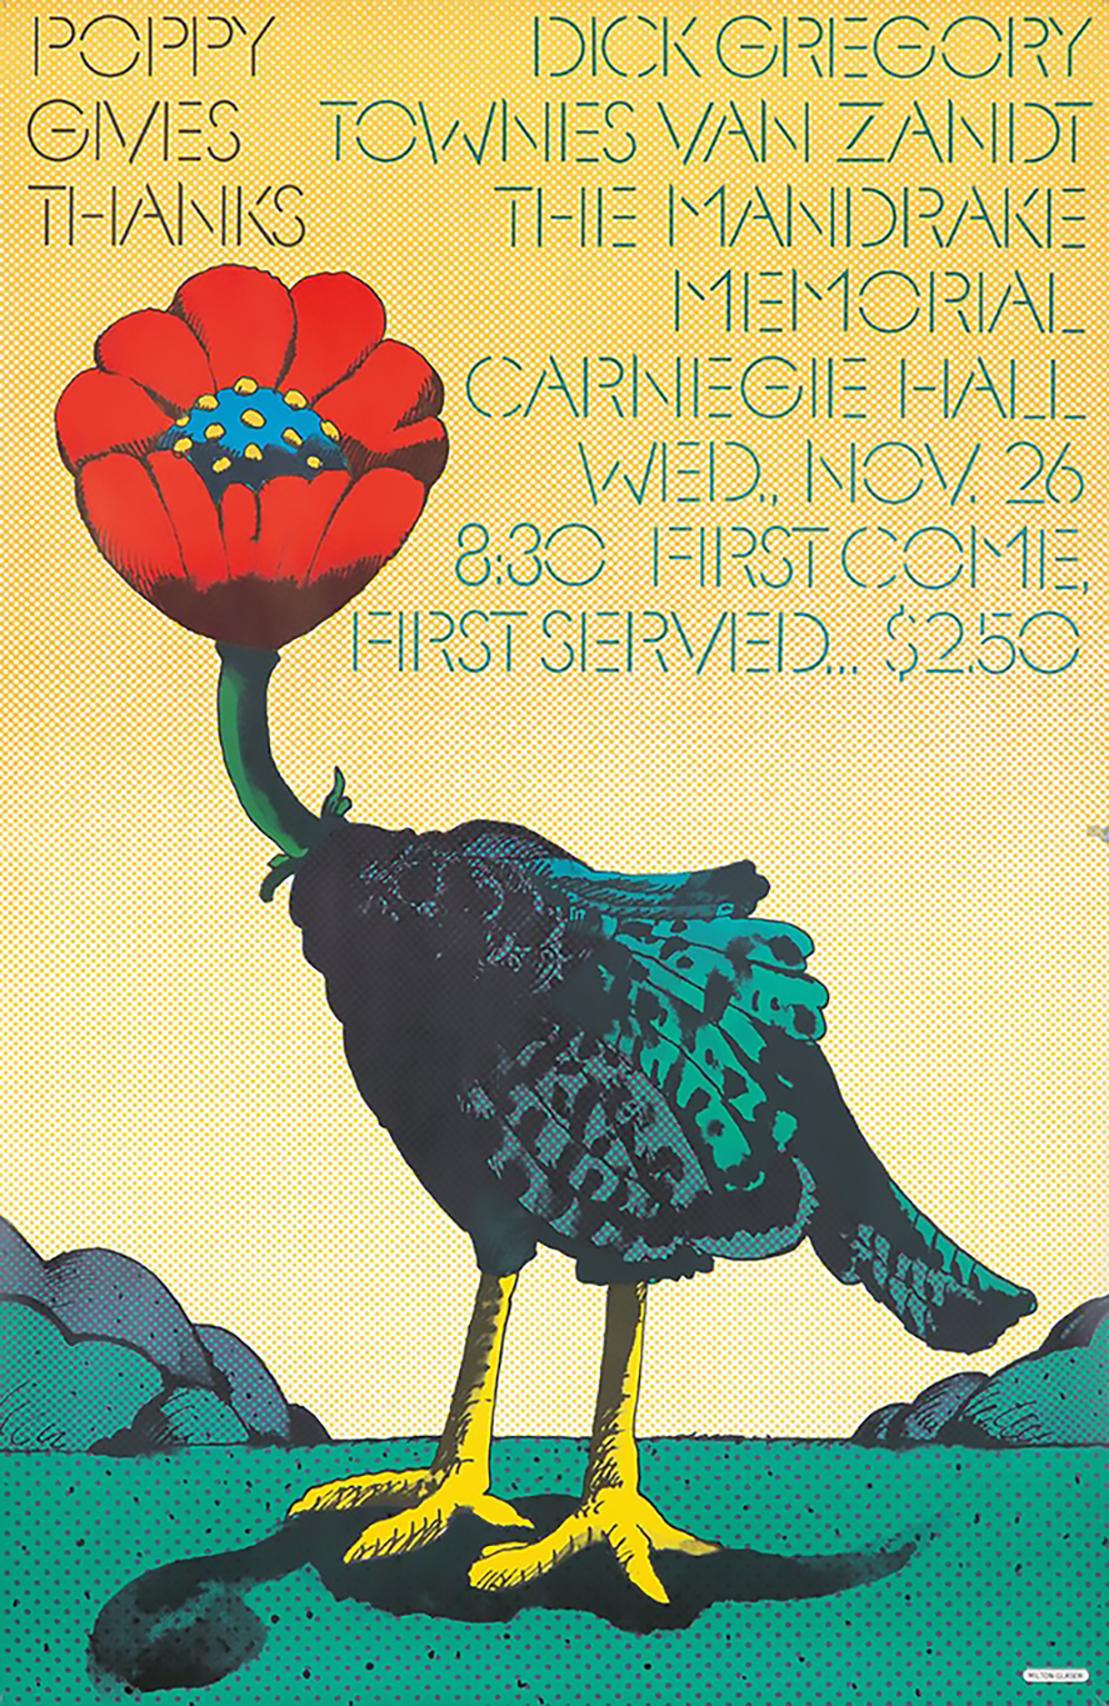 1960s Milton Glaser Poster Art: 
Milton Glaser Poppy Gives Thanks: Vintage original Milton Glaser poster c.1968. Designed by Milton Glaser on the occasion of a concert at New York's Carnegie Hall featuring poppy recording artists (Townes Van Zandt,